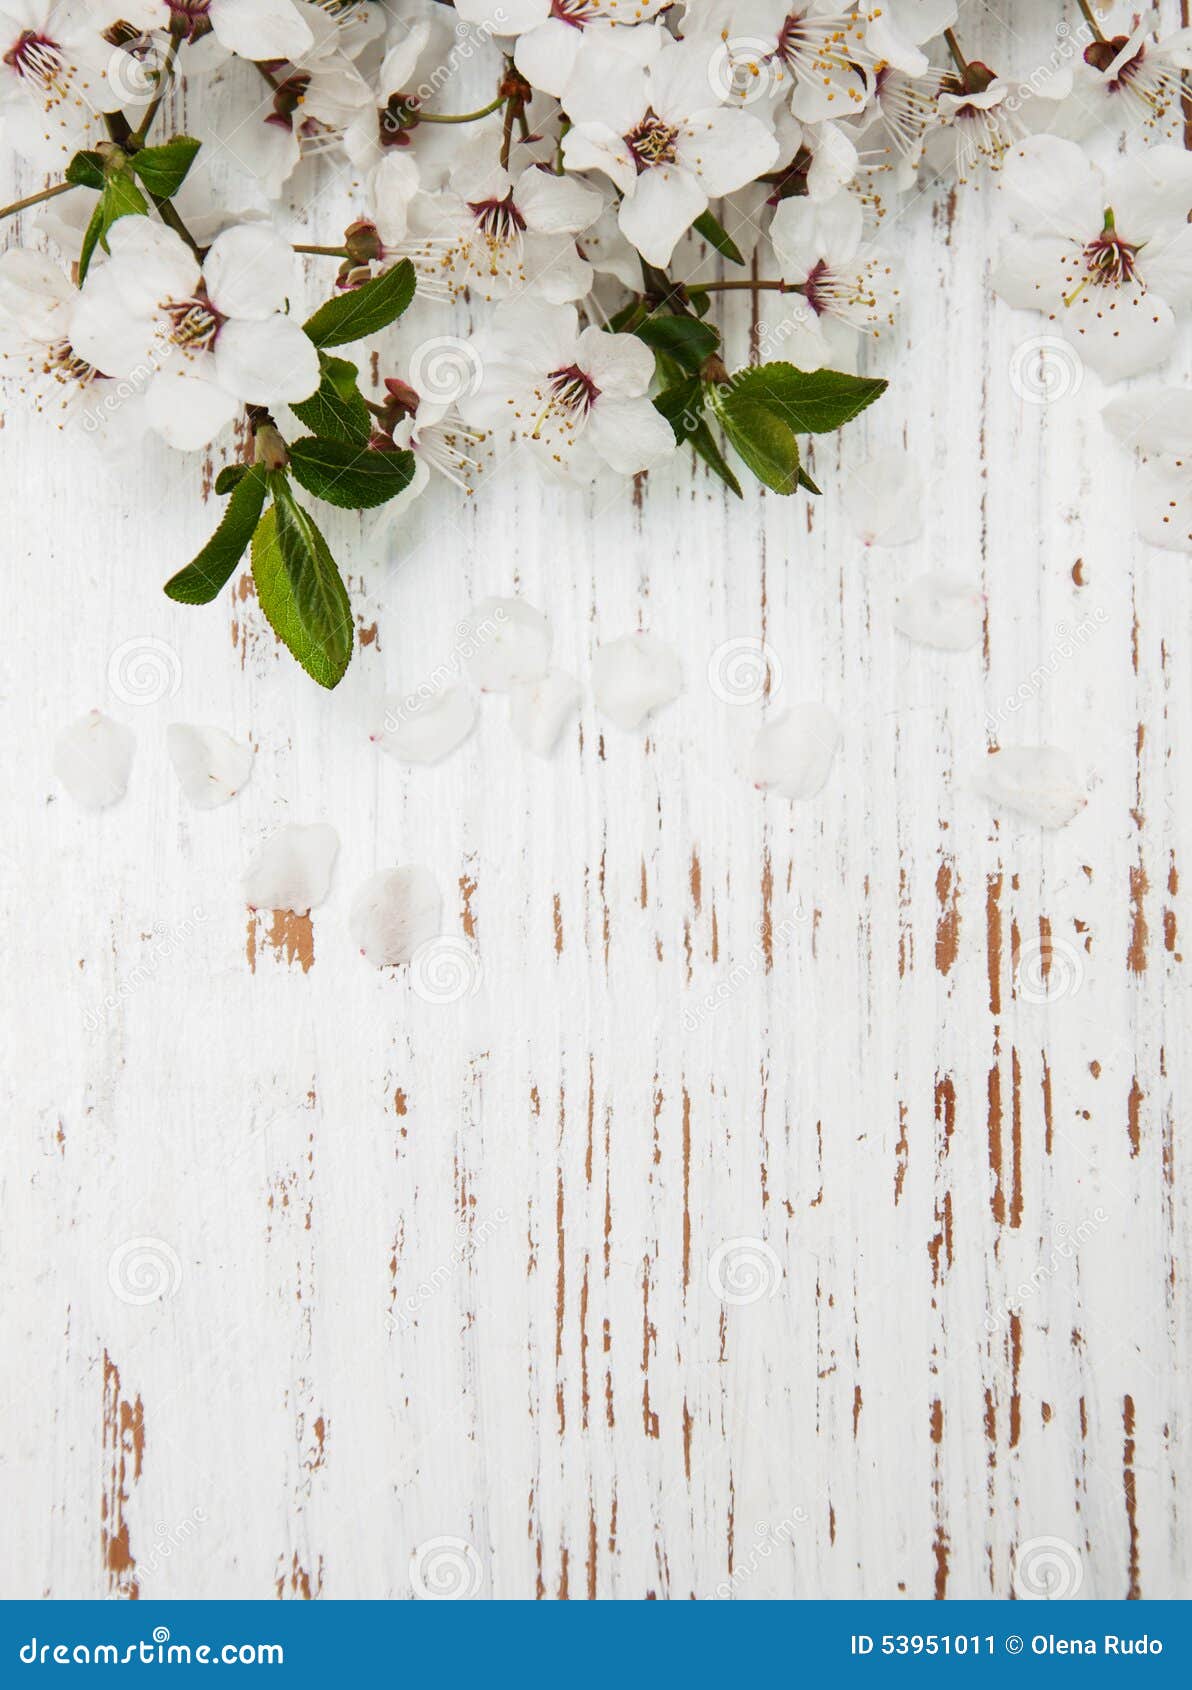 Spring Blossom on Wood Background Stock Image - Image of petal, apricot ...